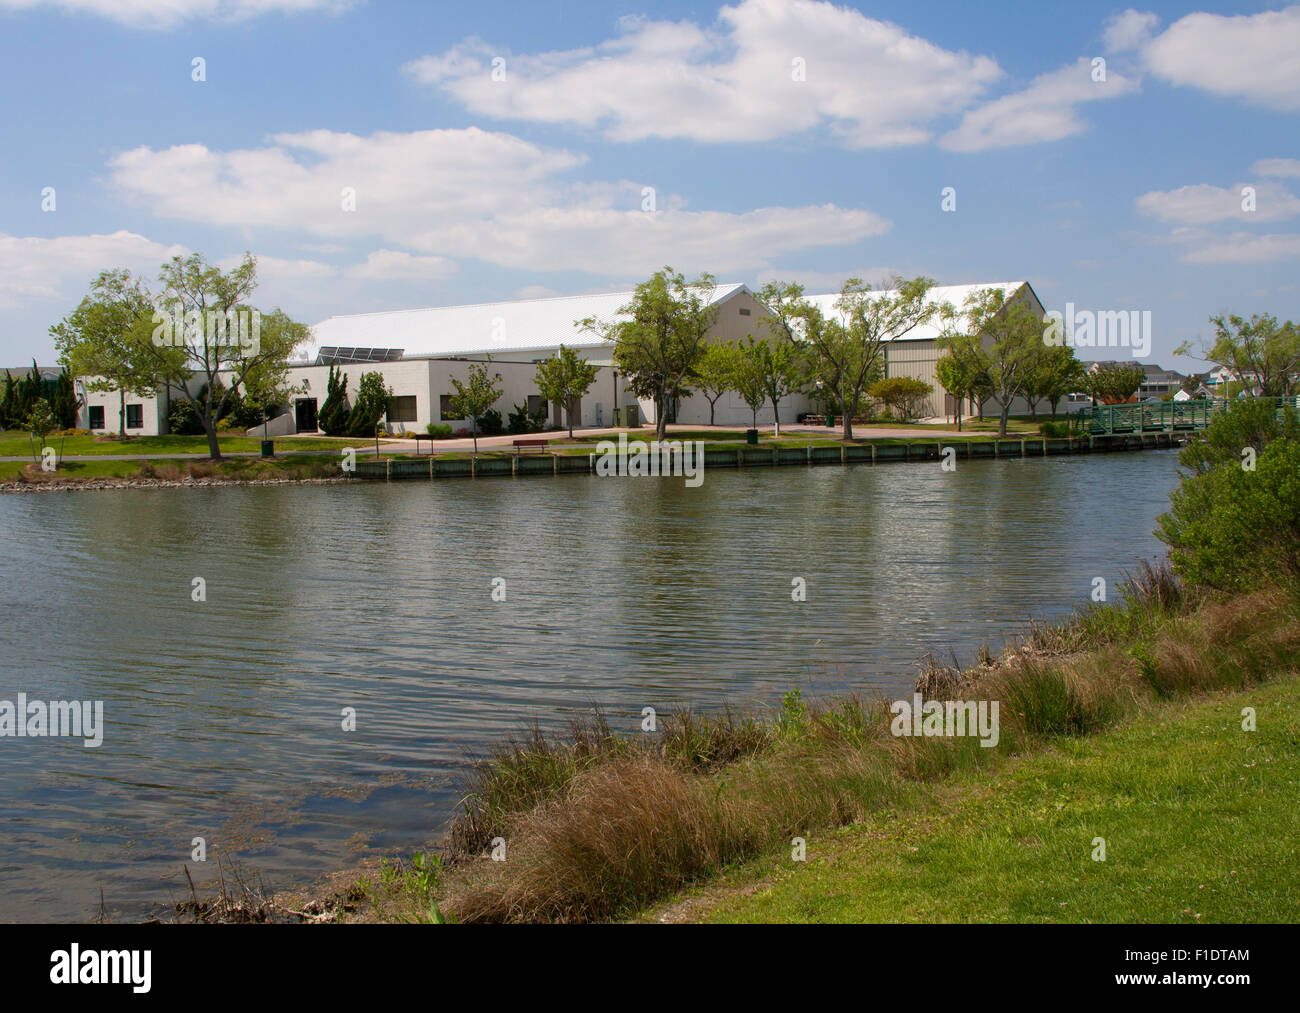 Ocean City, MD – May 13, 2015: A view of the community buildings from the walking path around Northside Park in Ocean City. Stock Photo